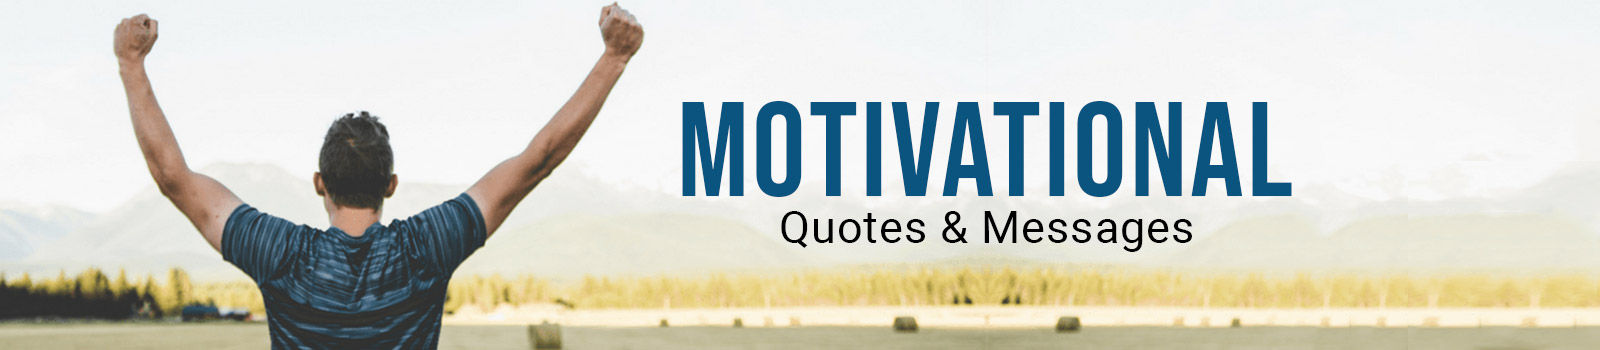 Motivational Life Quotes & Messages